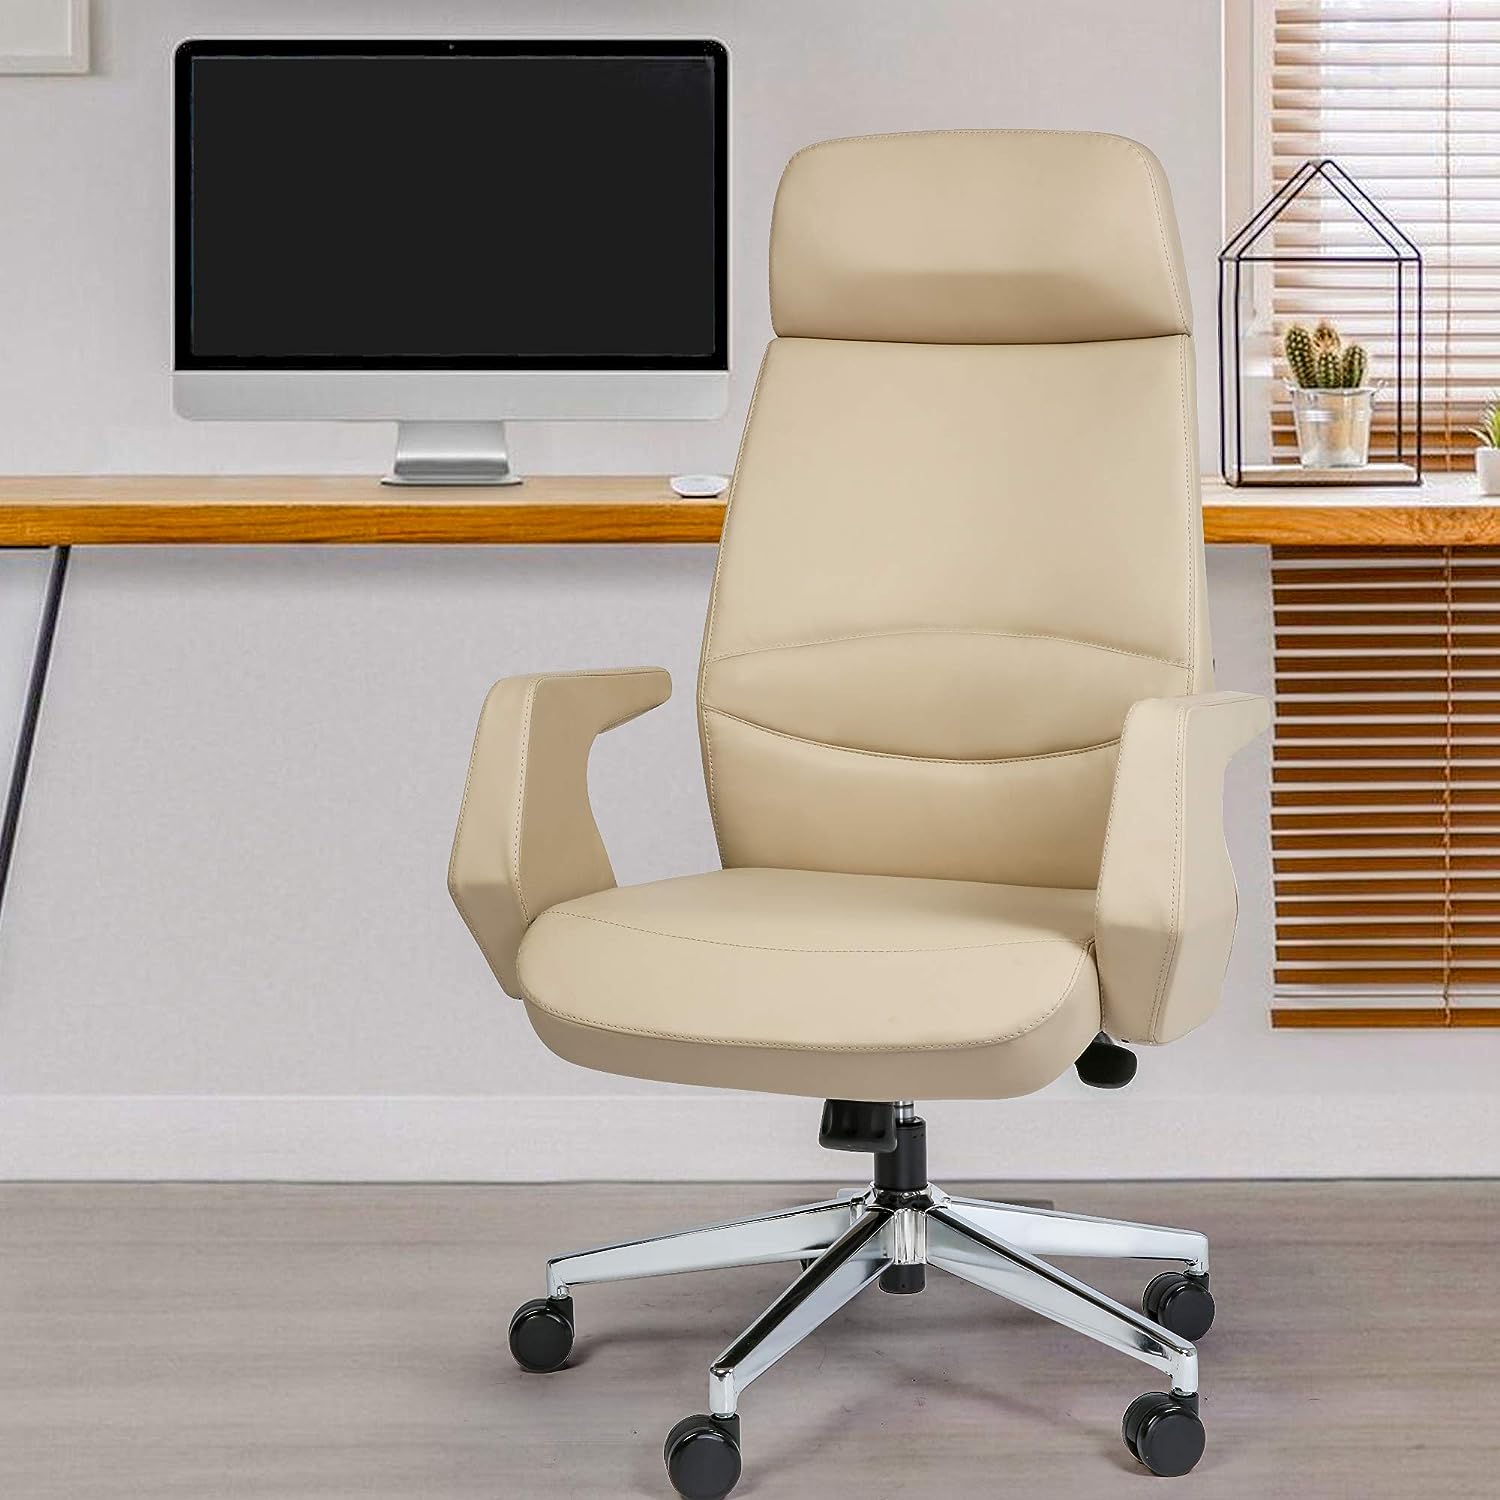 Executive Office Chair Ergonomic Leather High Back Chair with Padded Armrests Lumbar Support